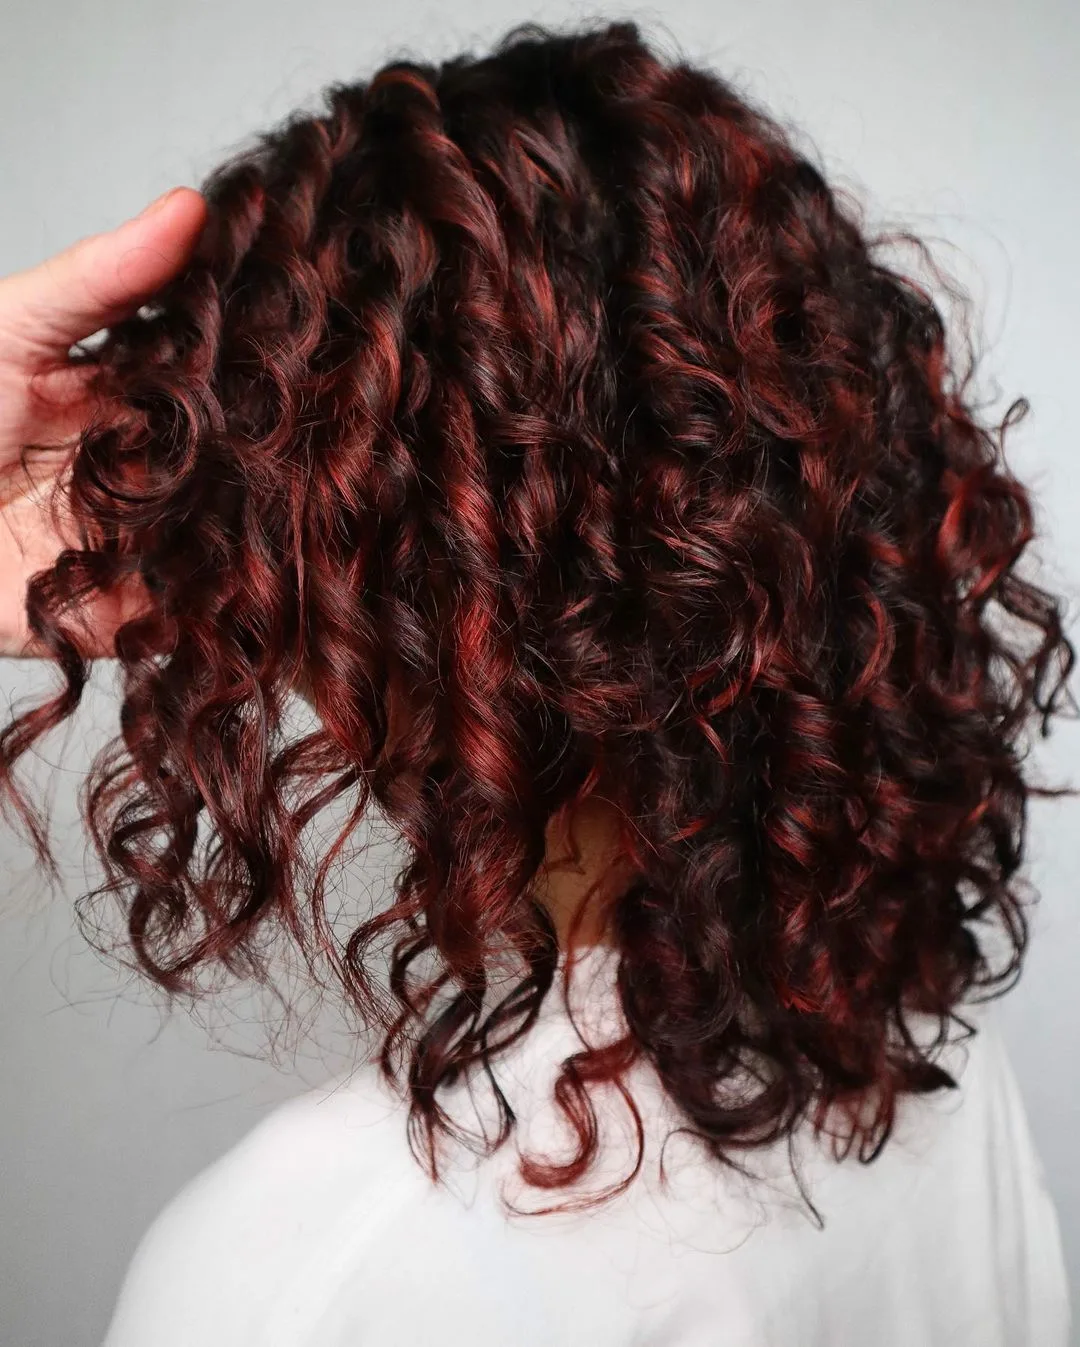 shoulder length curly hair with red highlights shown from behind